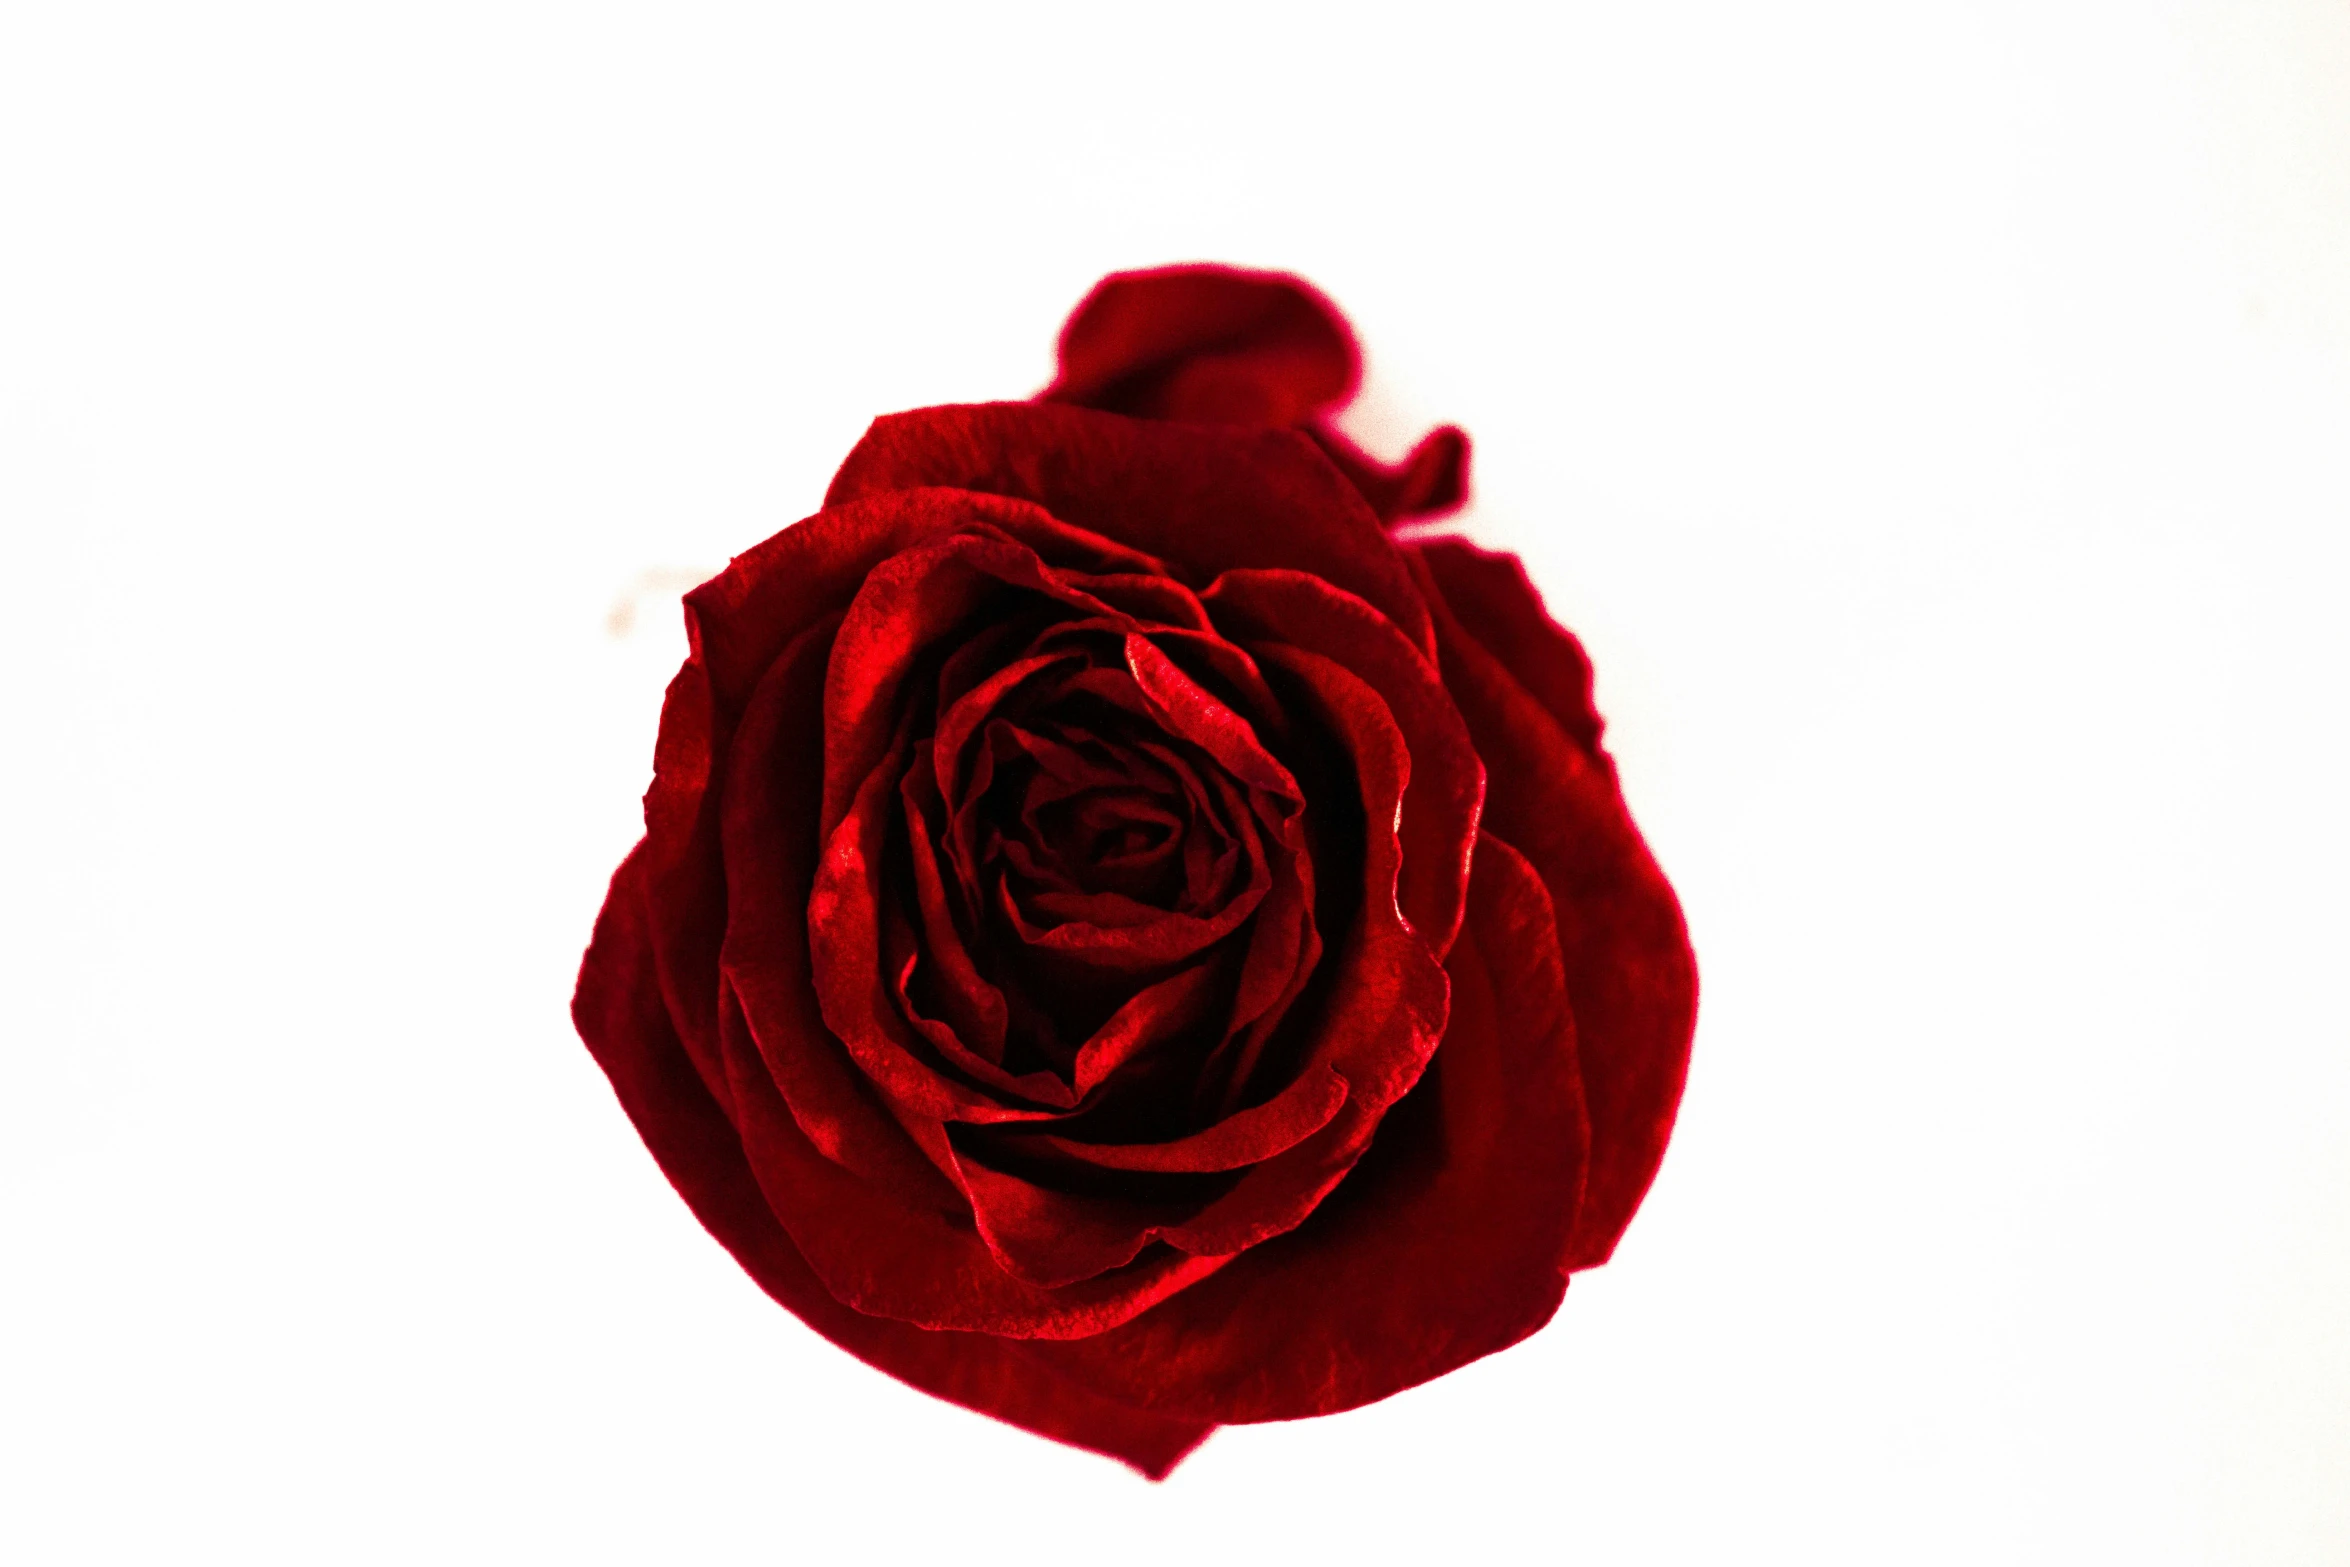 a rose that is in the air against a white background